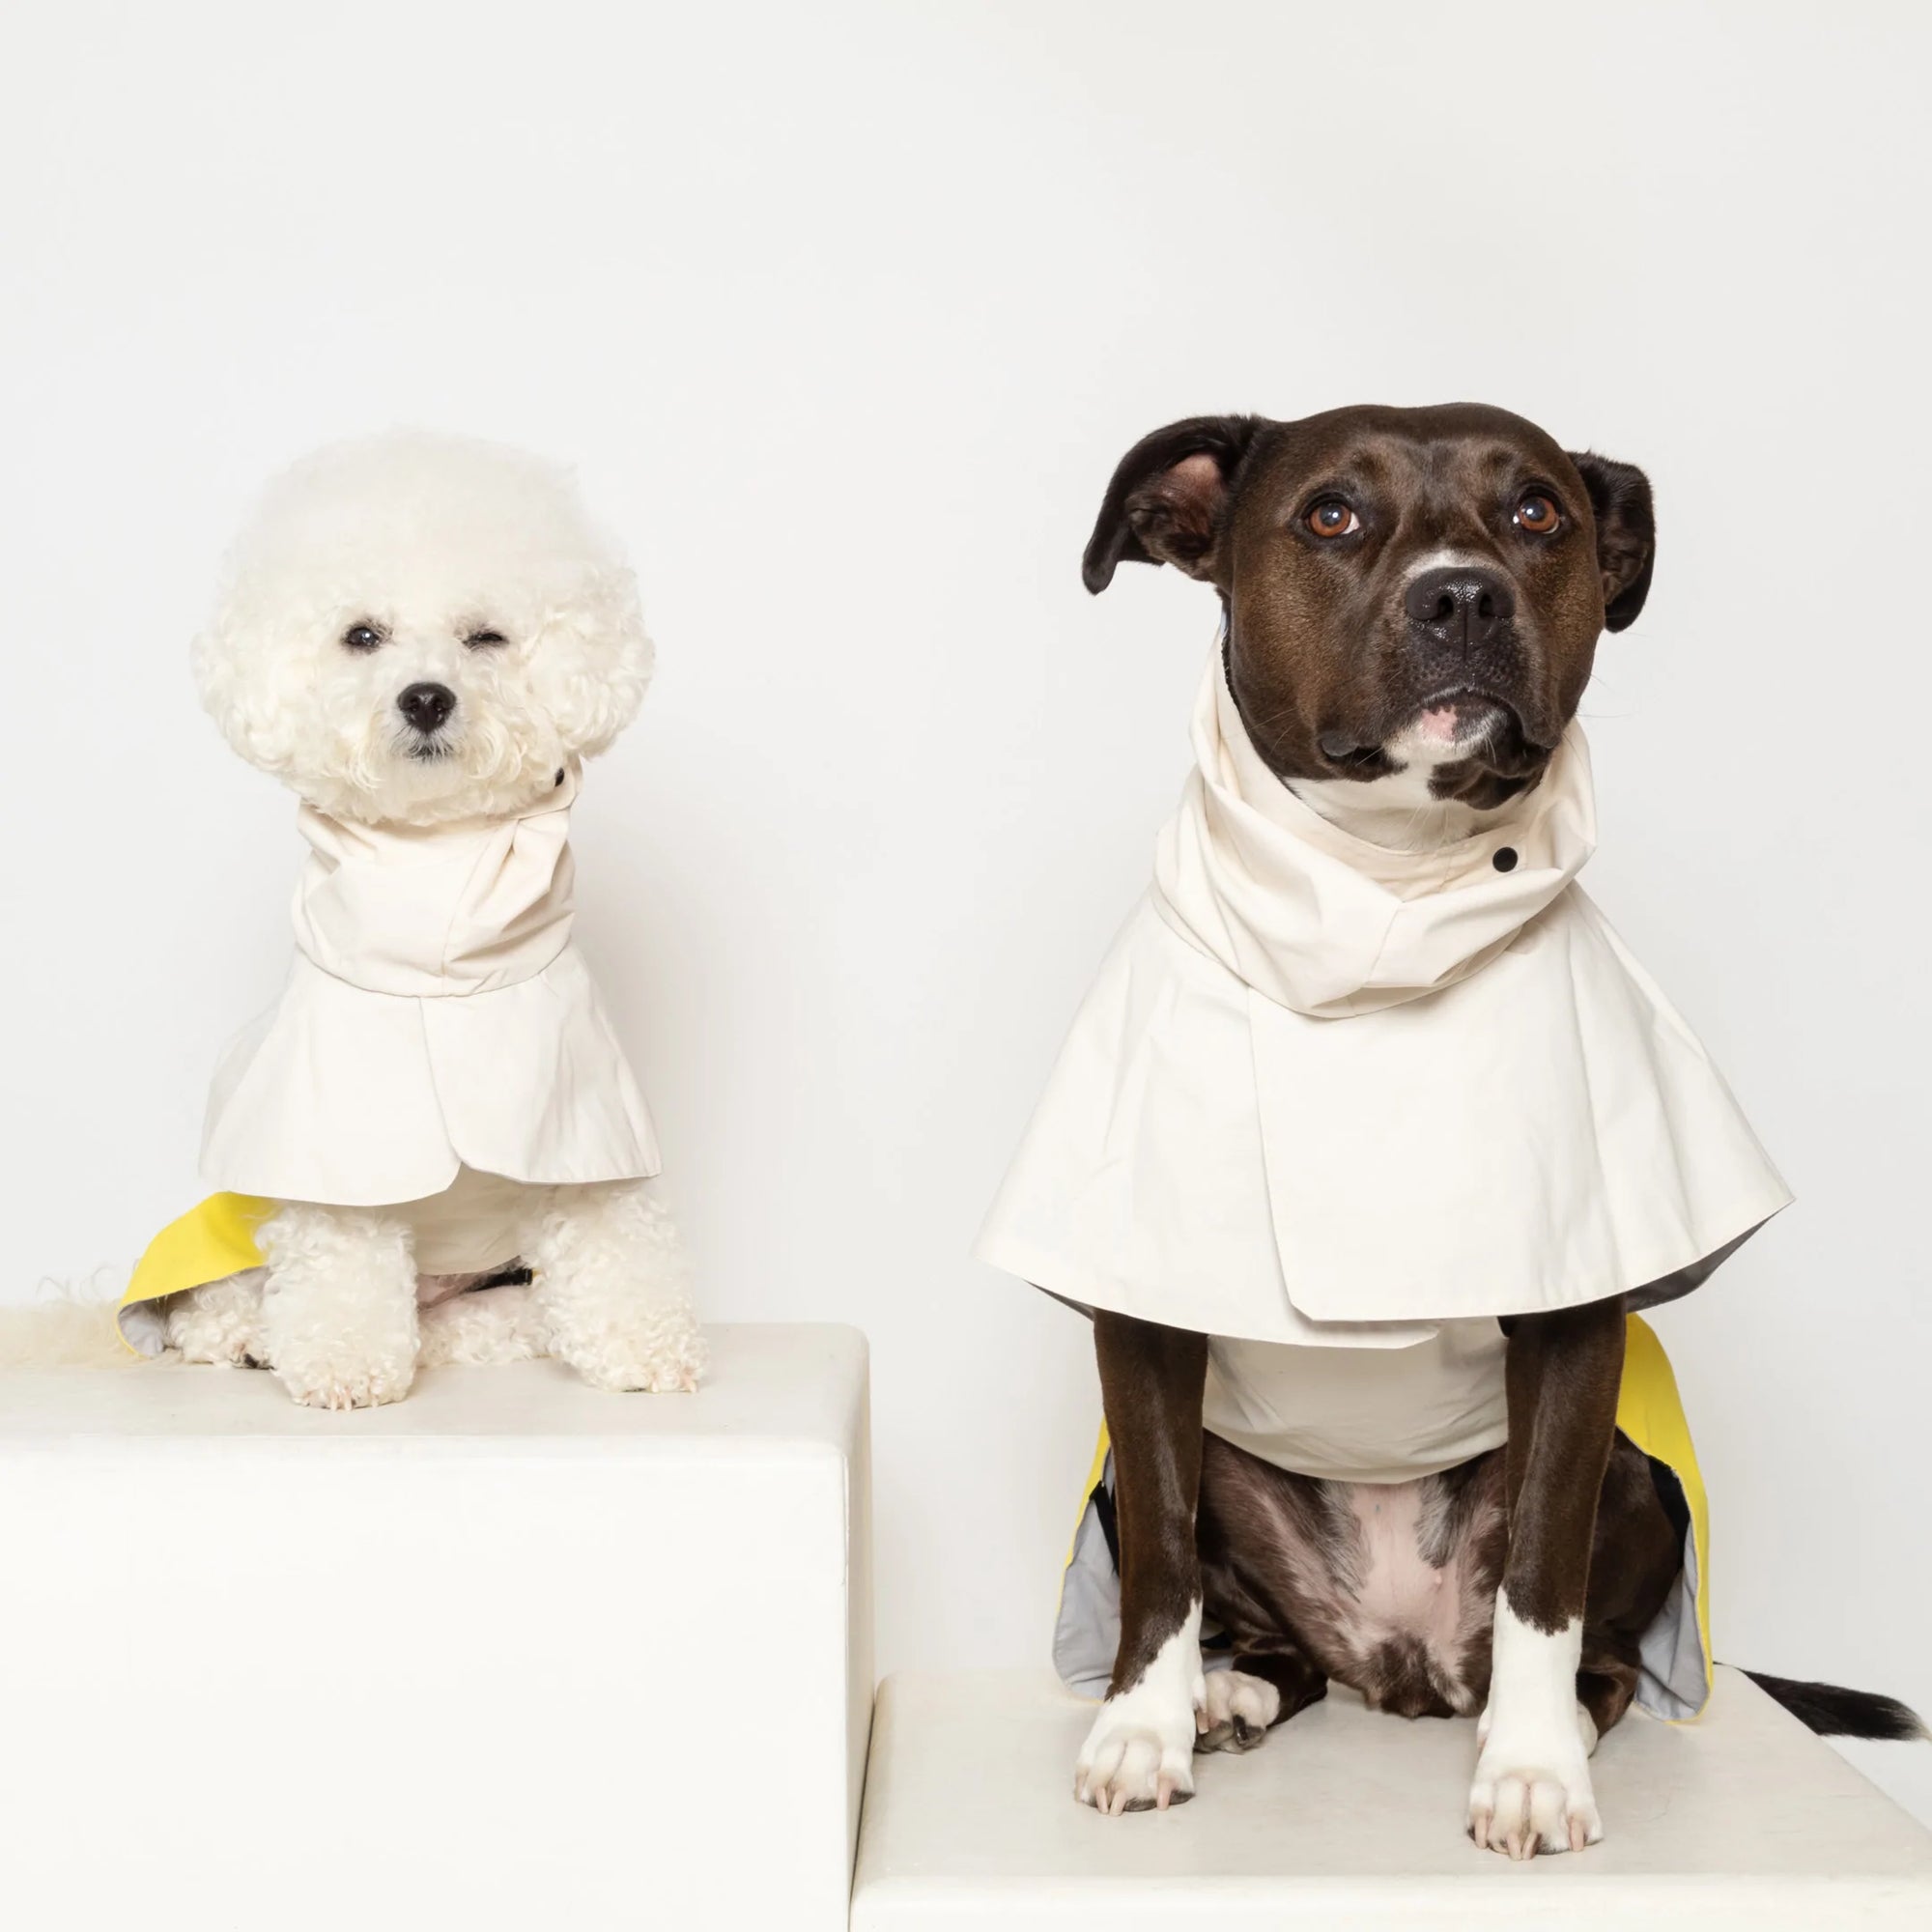 Two dogs in chic raincoats; one fluffy white and the other a dignified brown.